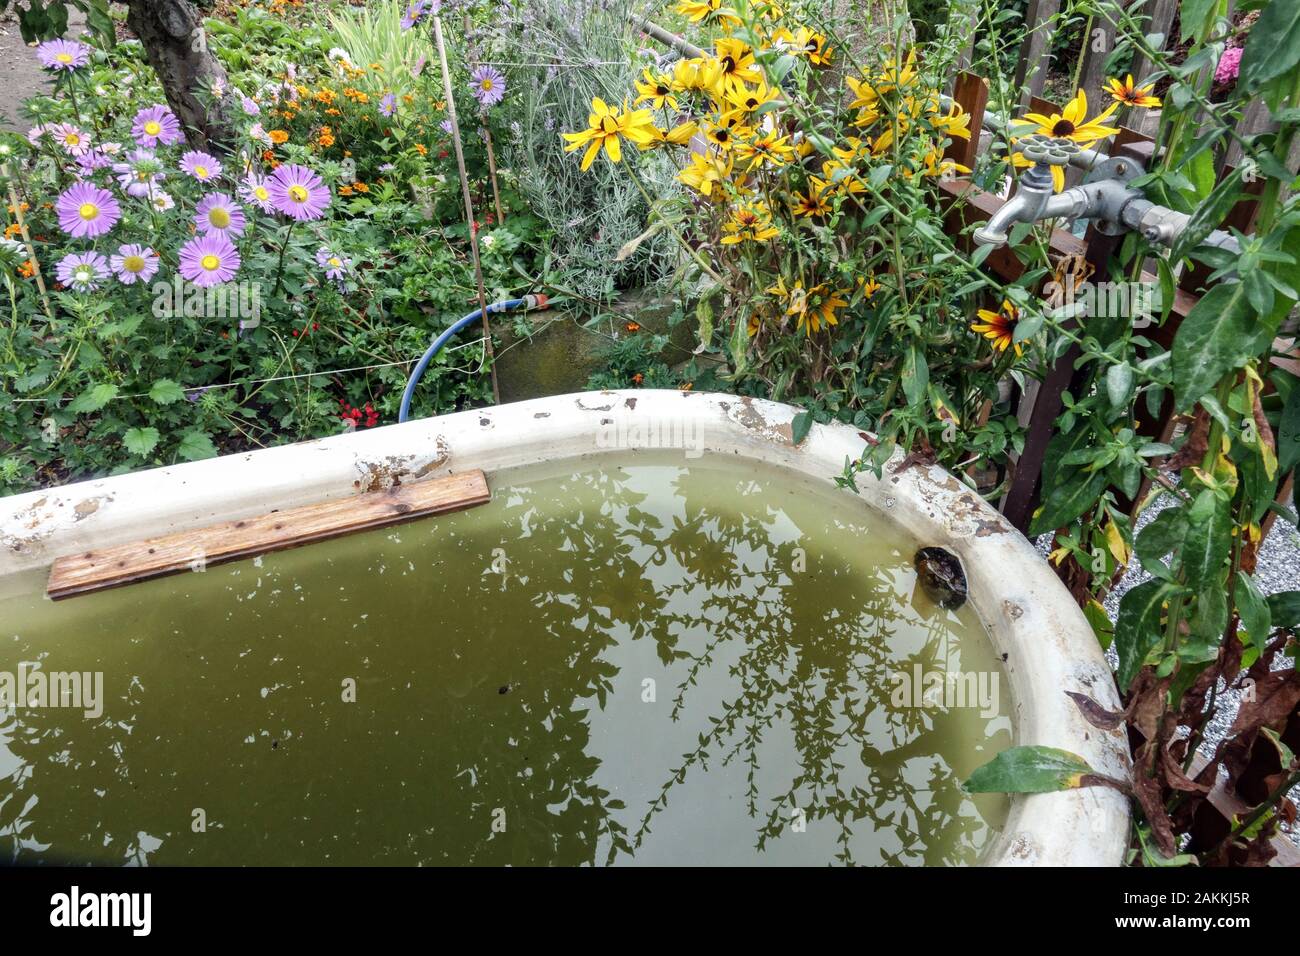 Rain water in an old bathtub on a watering garden, collecting rainwater Stock Photo